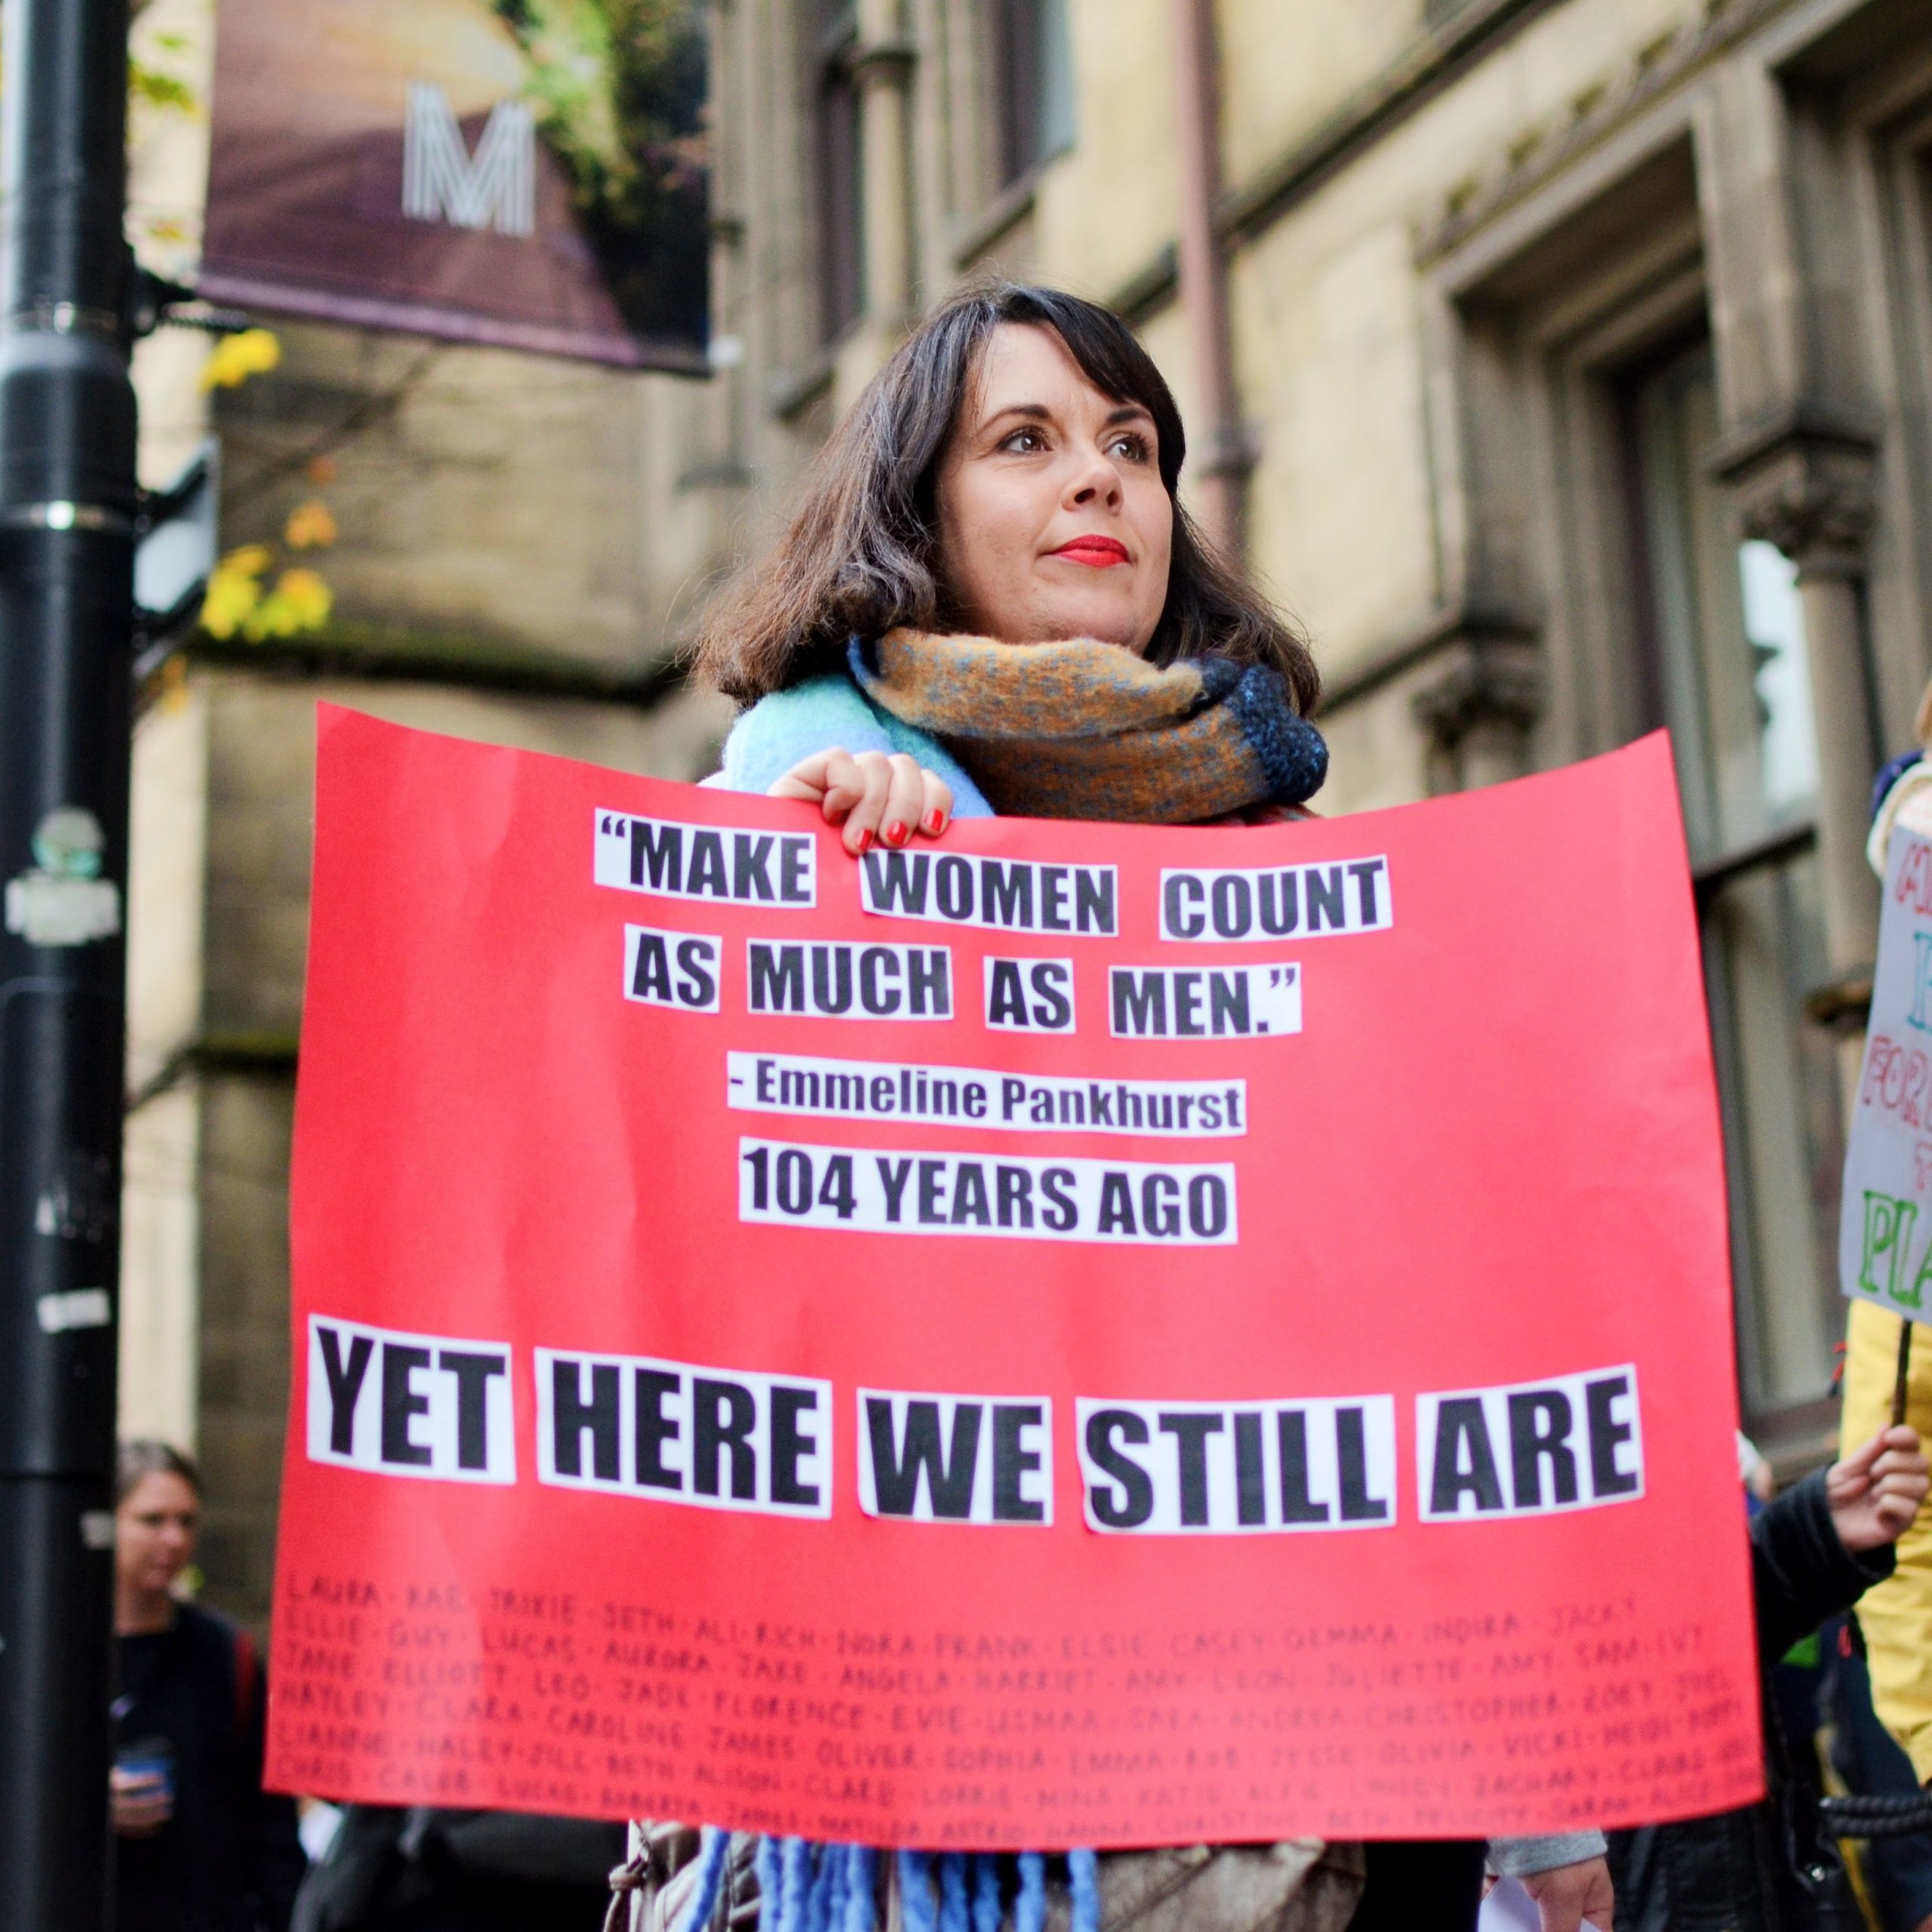 Woman holding a red sign that reads 'Make women count as much as men' - yet here we still are